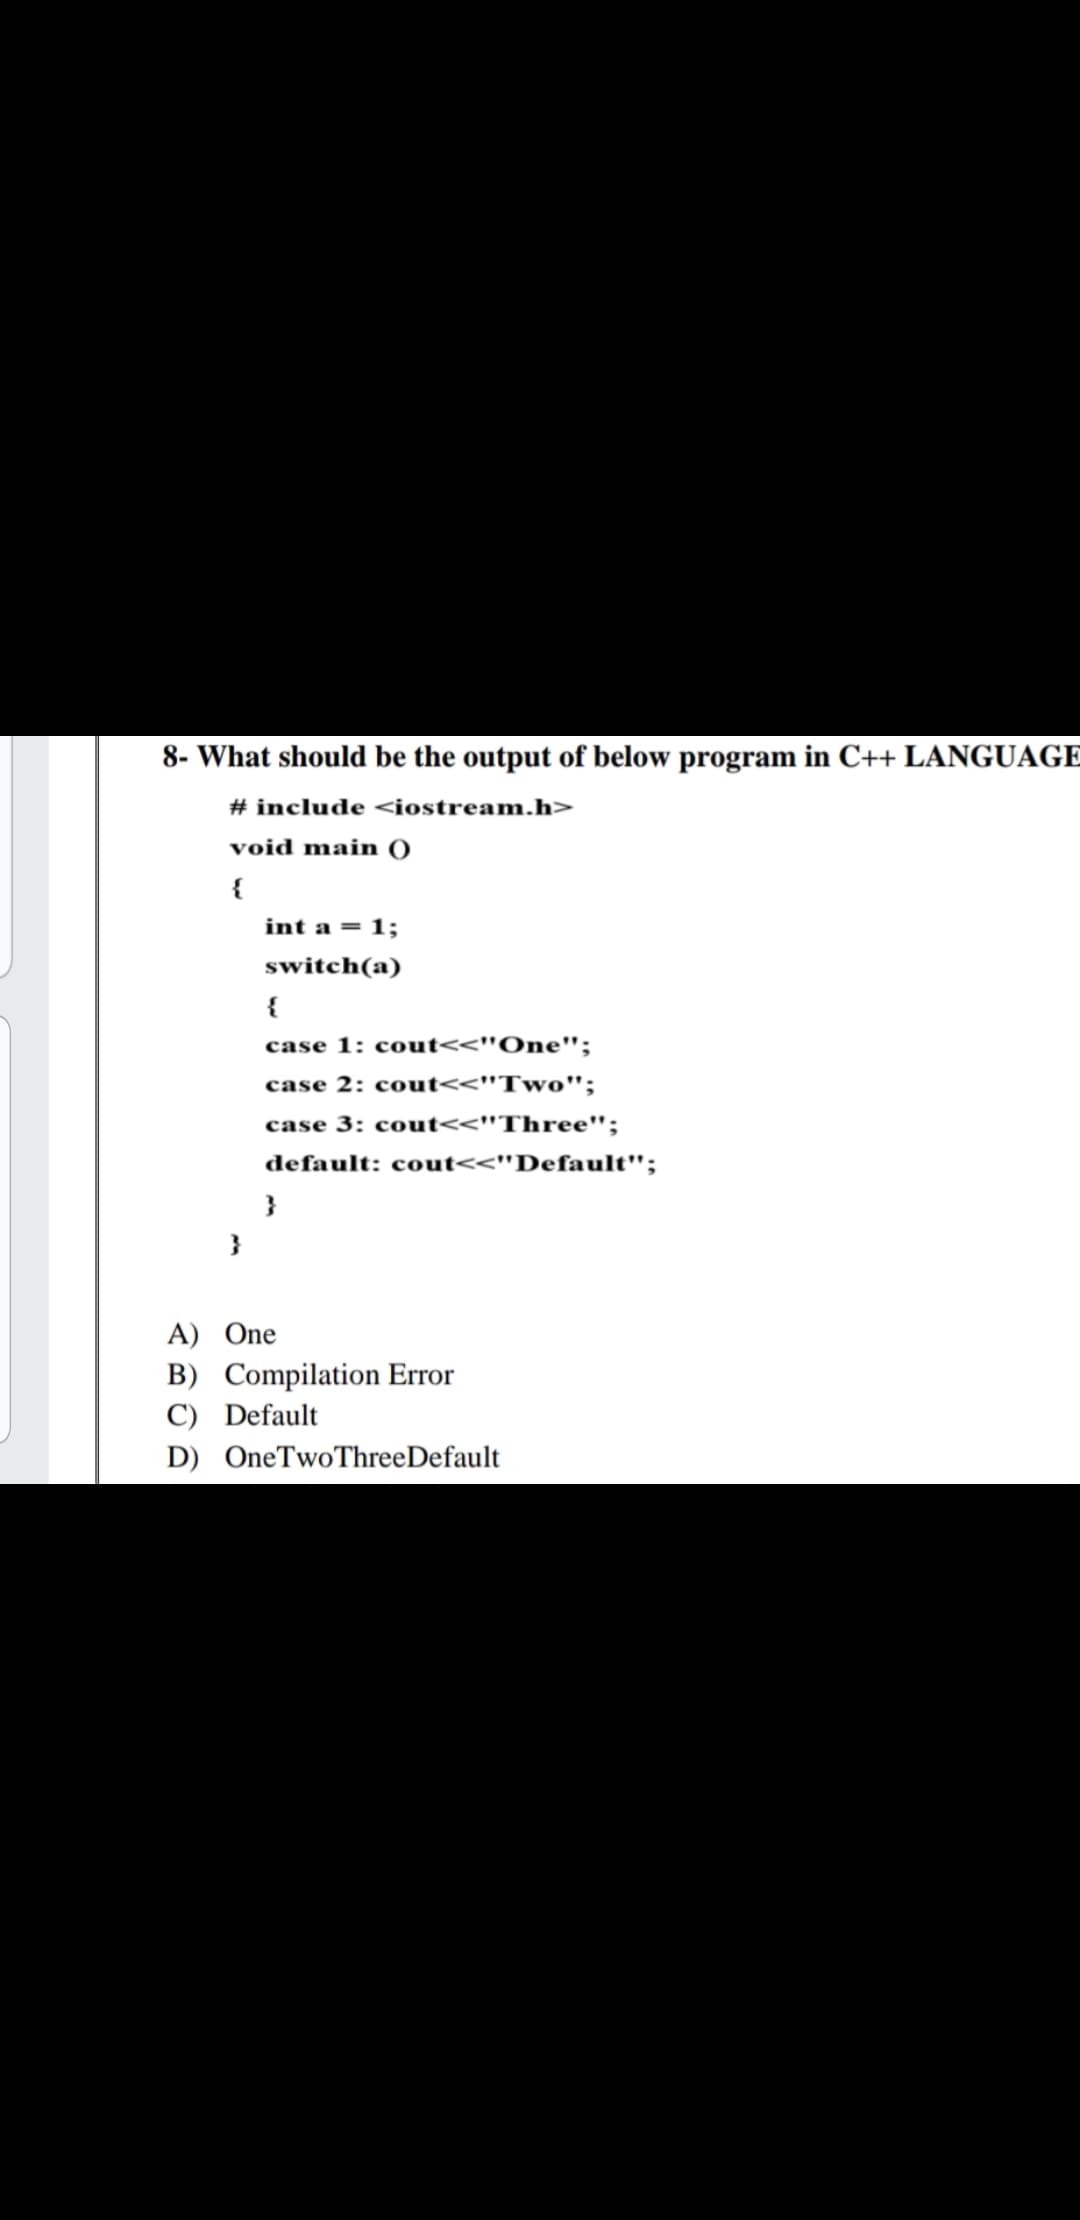 8- What should be the output of below program in C++ LANGUAGE
# include <iostream.h>
void main )
{
int a = 1;
switch(a)
{
case 1: cout<<"One";
case 2: cout<<"Two";
case 3: cout<<"Three";
default: cout<<"Default";
}
A) One
B) Compilation Error
C) Default
D) OneTwoThreeDefault
